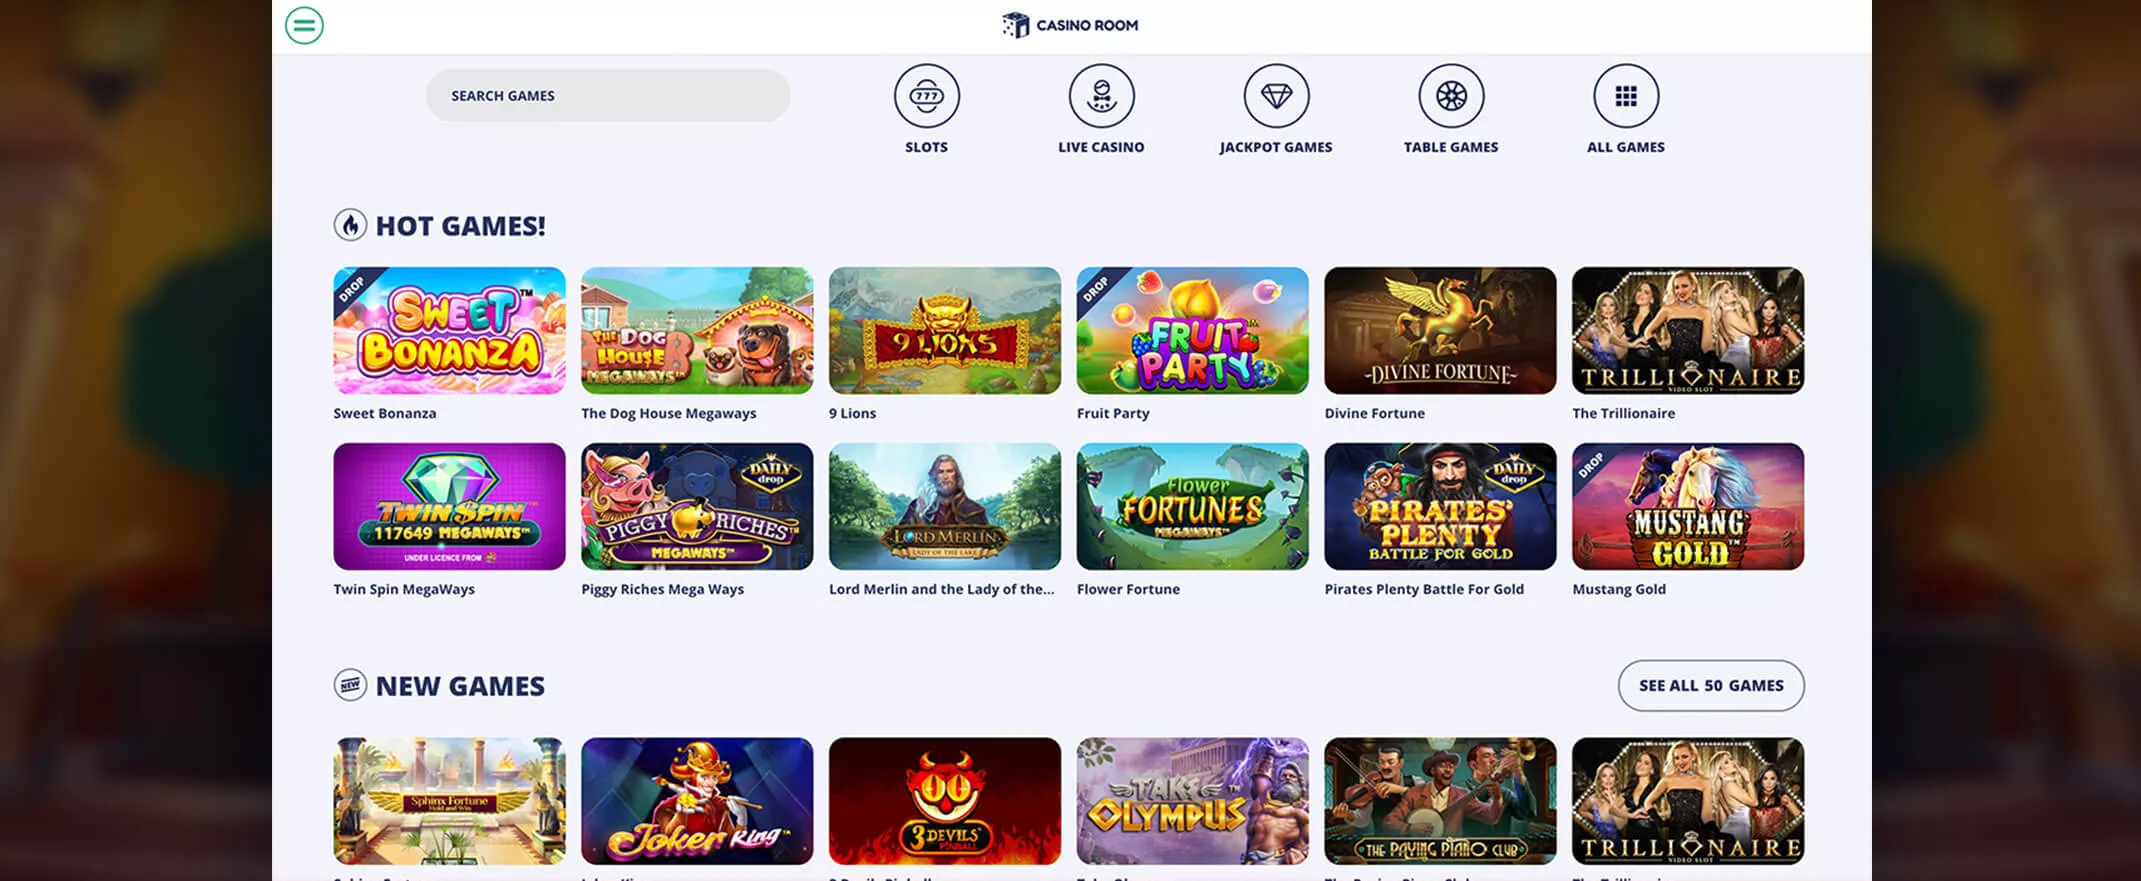 Casino Room screenshot of the games page